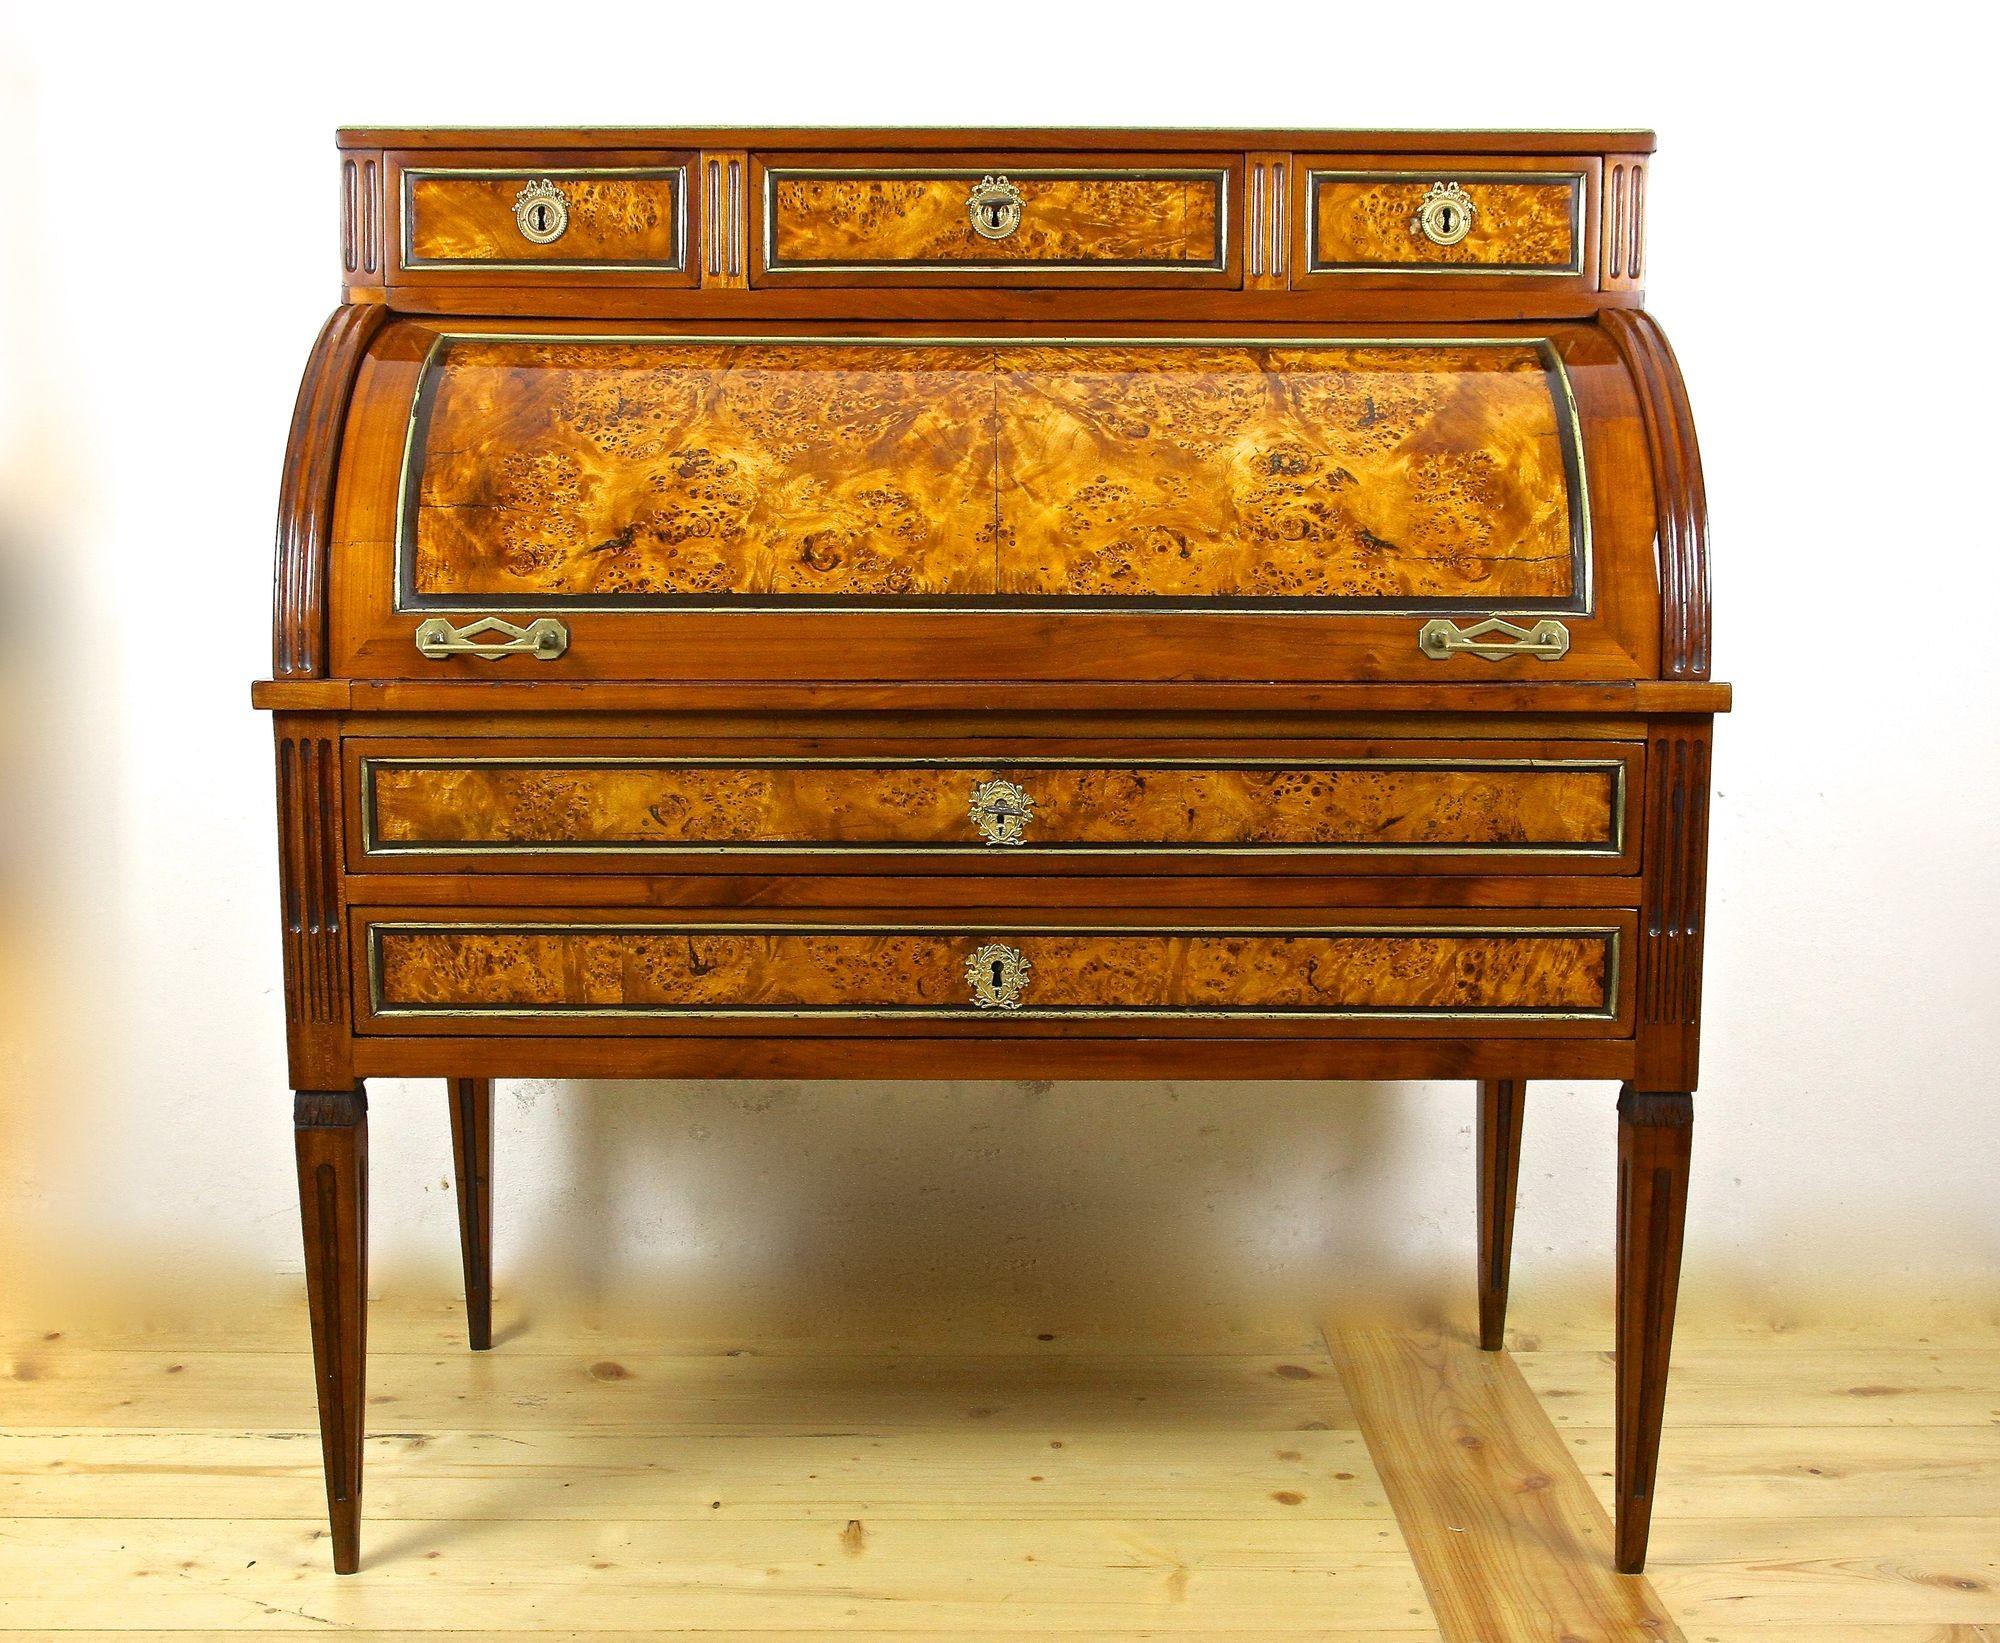 One of a kind, late 18th century French cylinder desk from the period around 1780. Beautifully handcrafted in France, this very special rolltop secretary bureau desk shows a fine cherrywood veneered surface. Fantastic looking fields made of